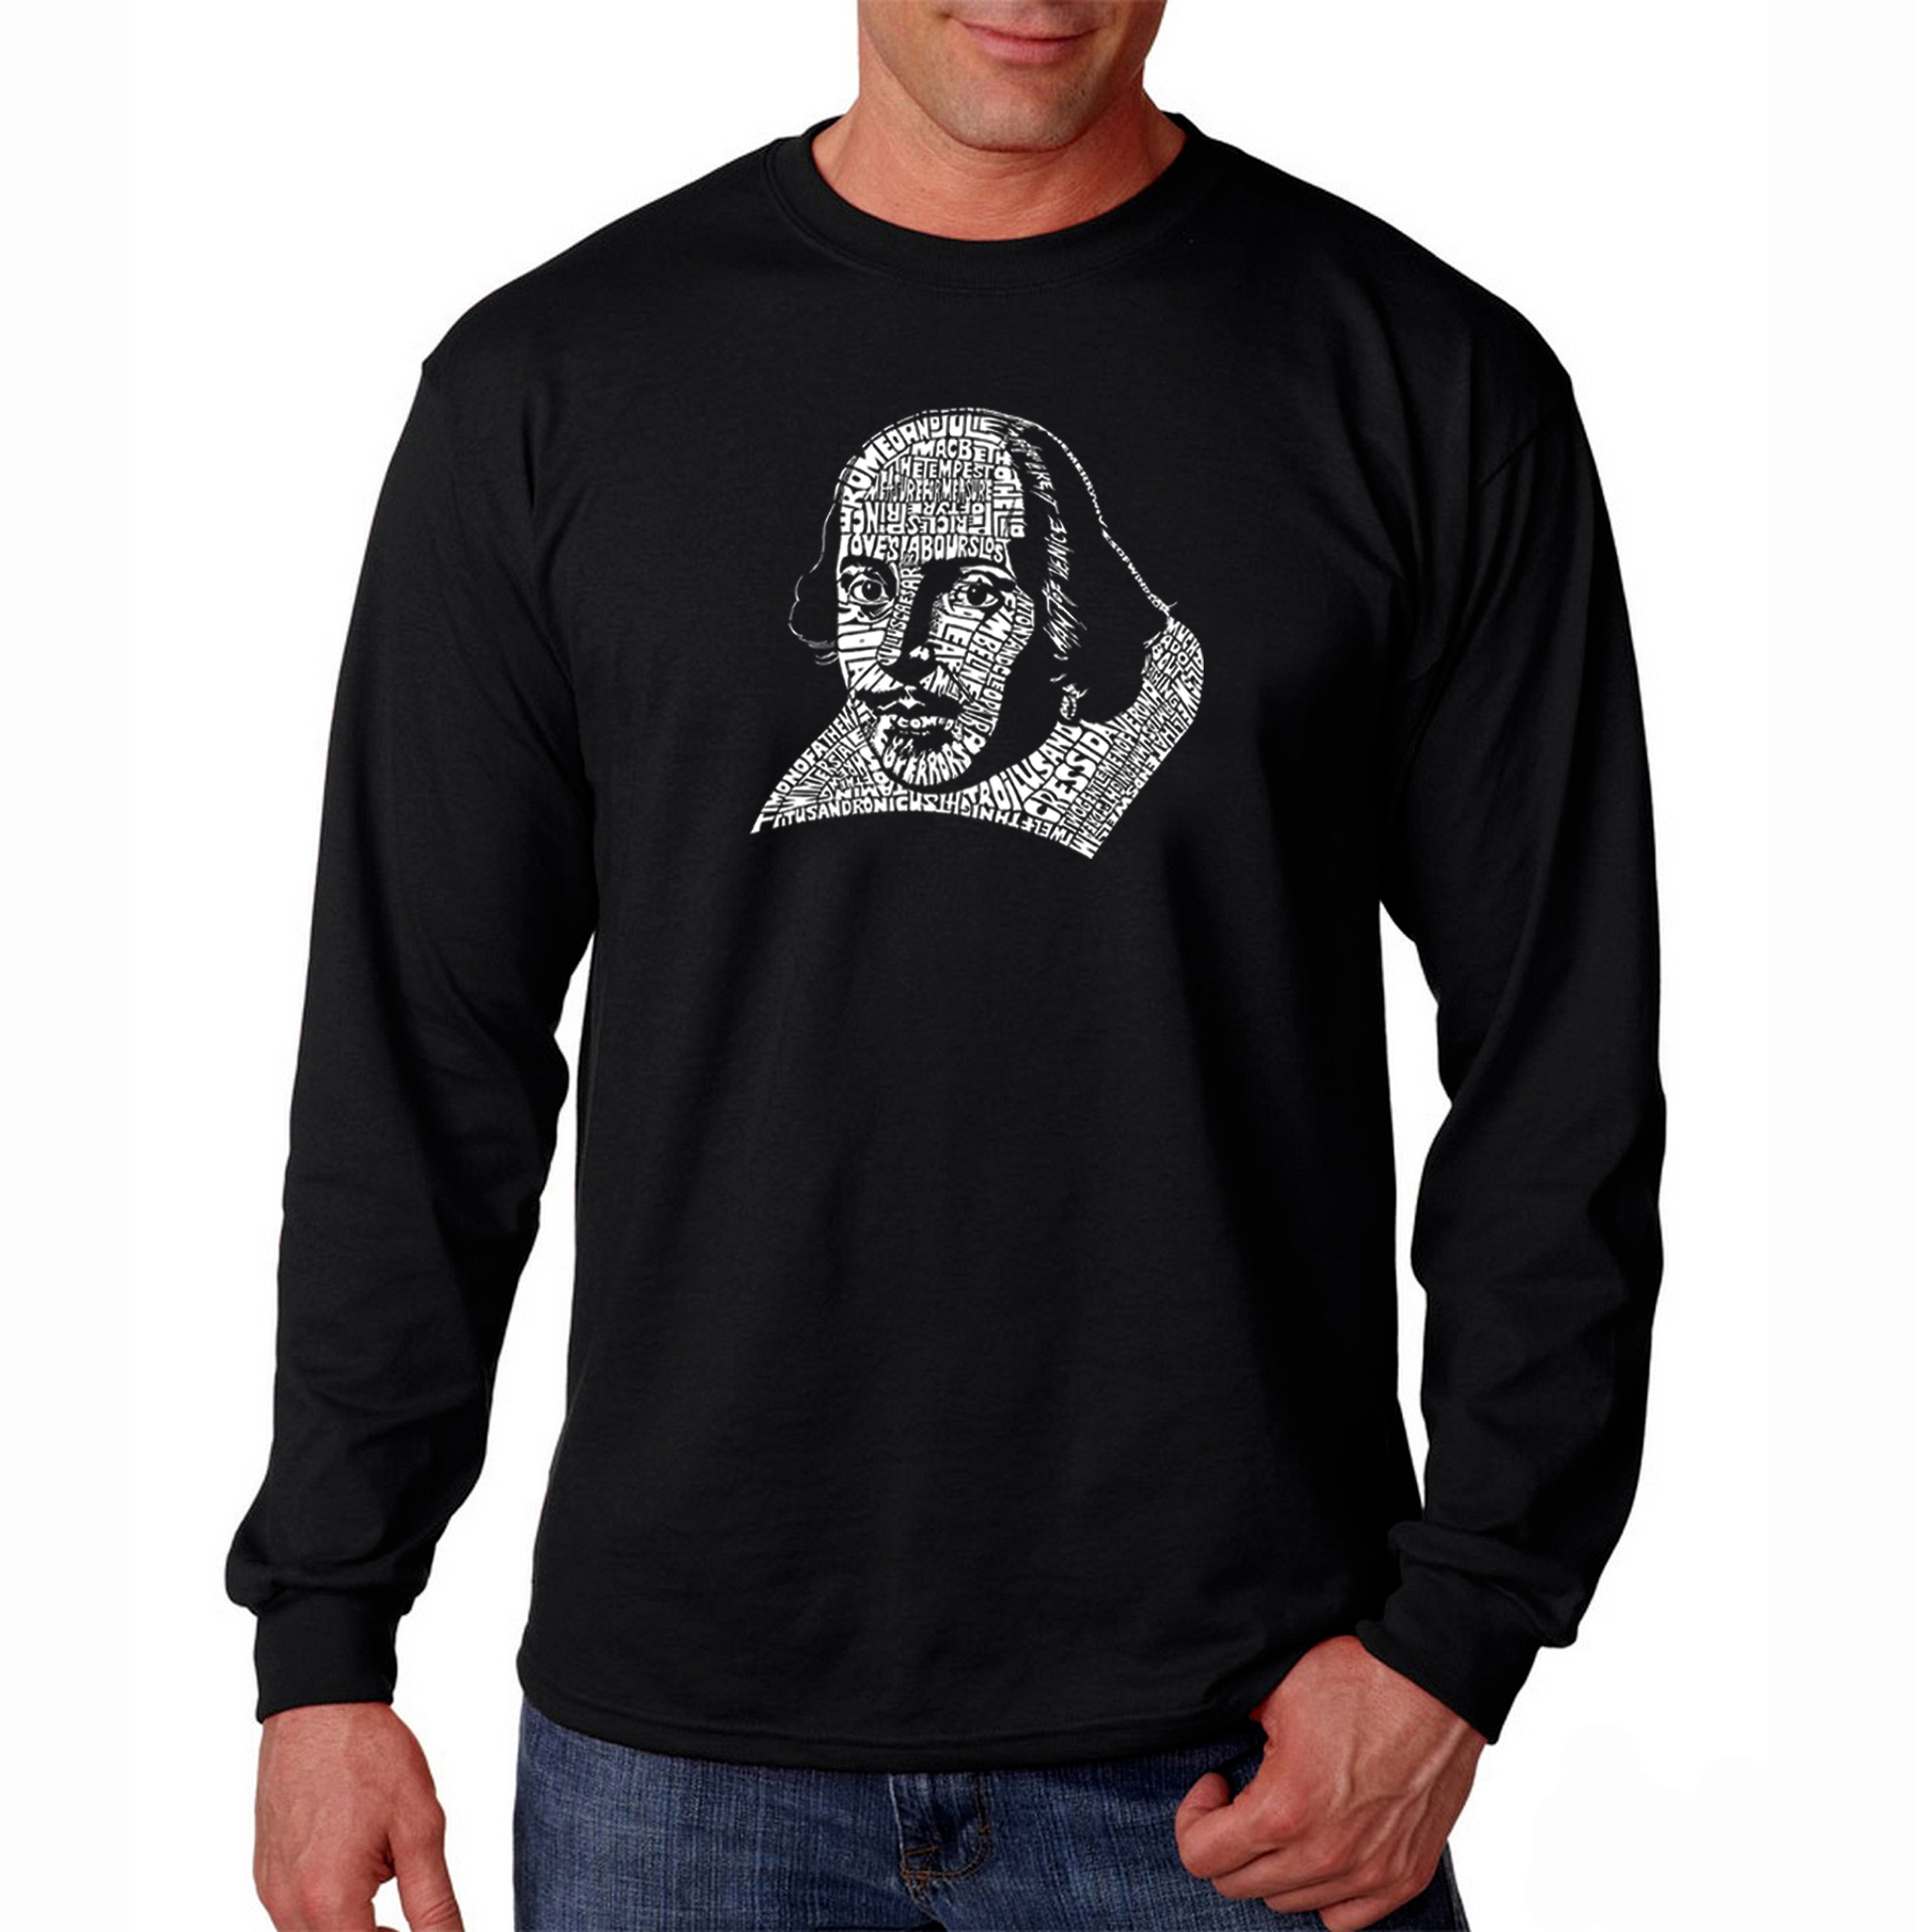 Los Angeles Pop Art Men's Big & Tall  Word Art Long Sleeve T-Shirt - The titles of all of William Shakespeare's Comedies & Tragedies